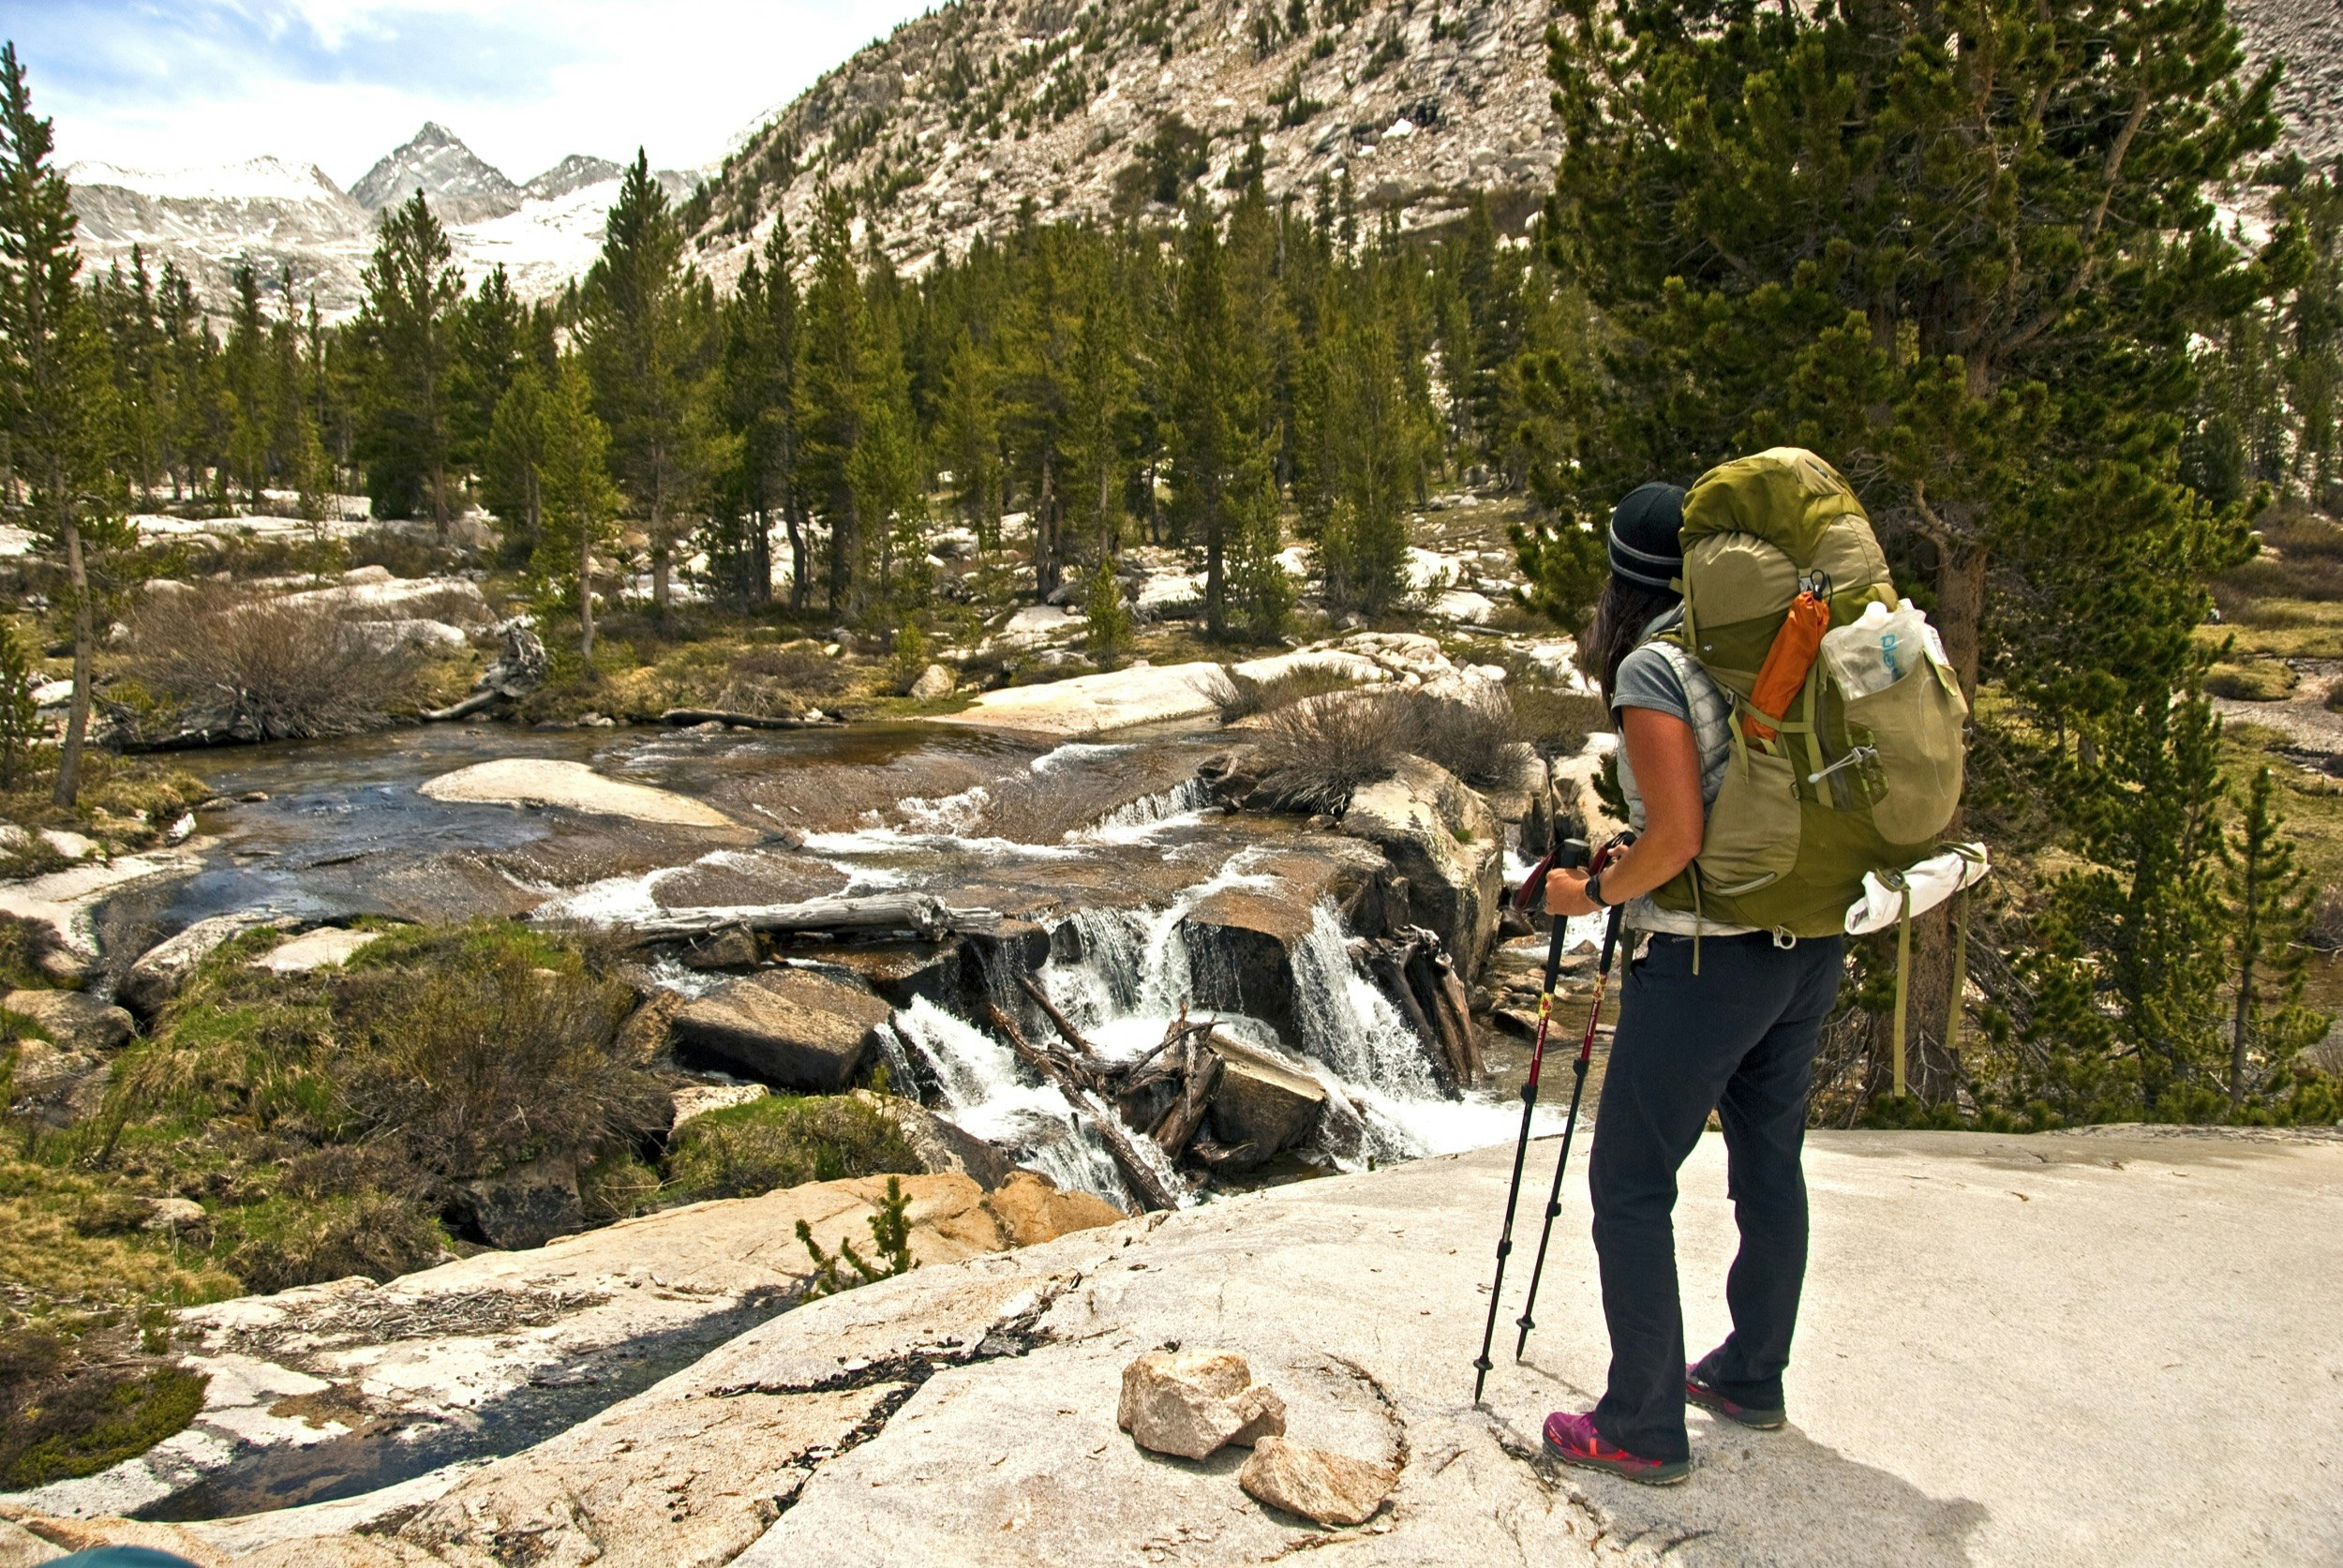 A woman stands on a large boulder as she looks at a tumbling creek at the base of a mountain on the John Muir Trail in California